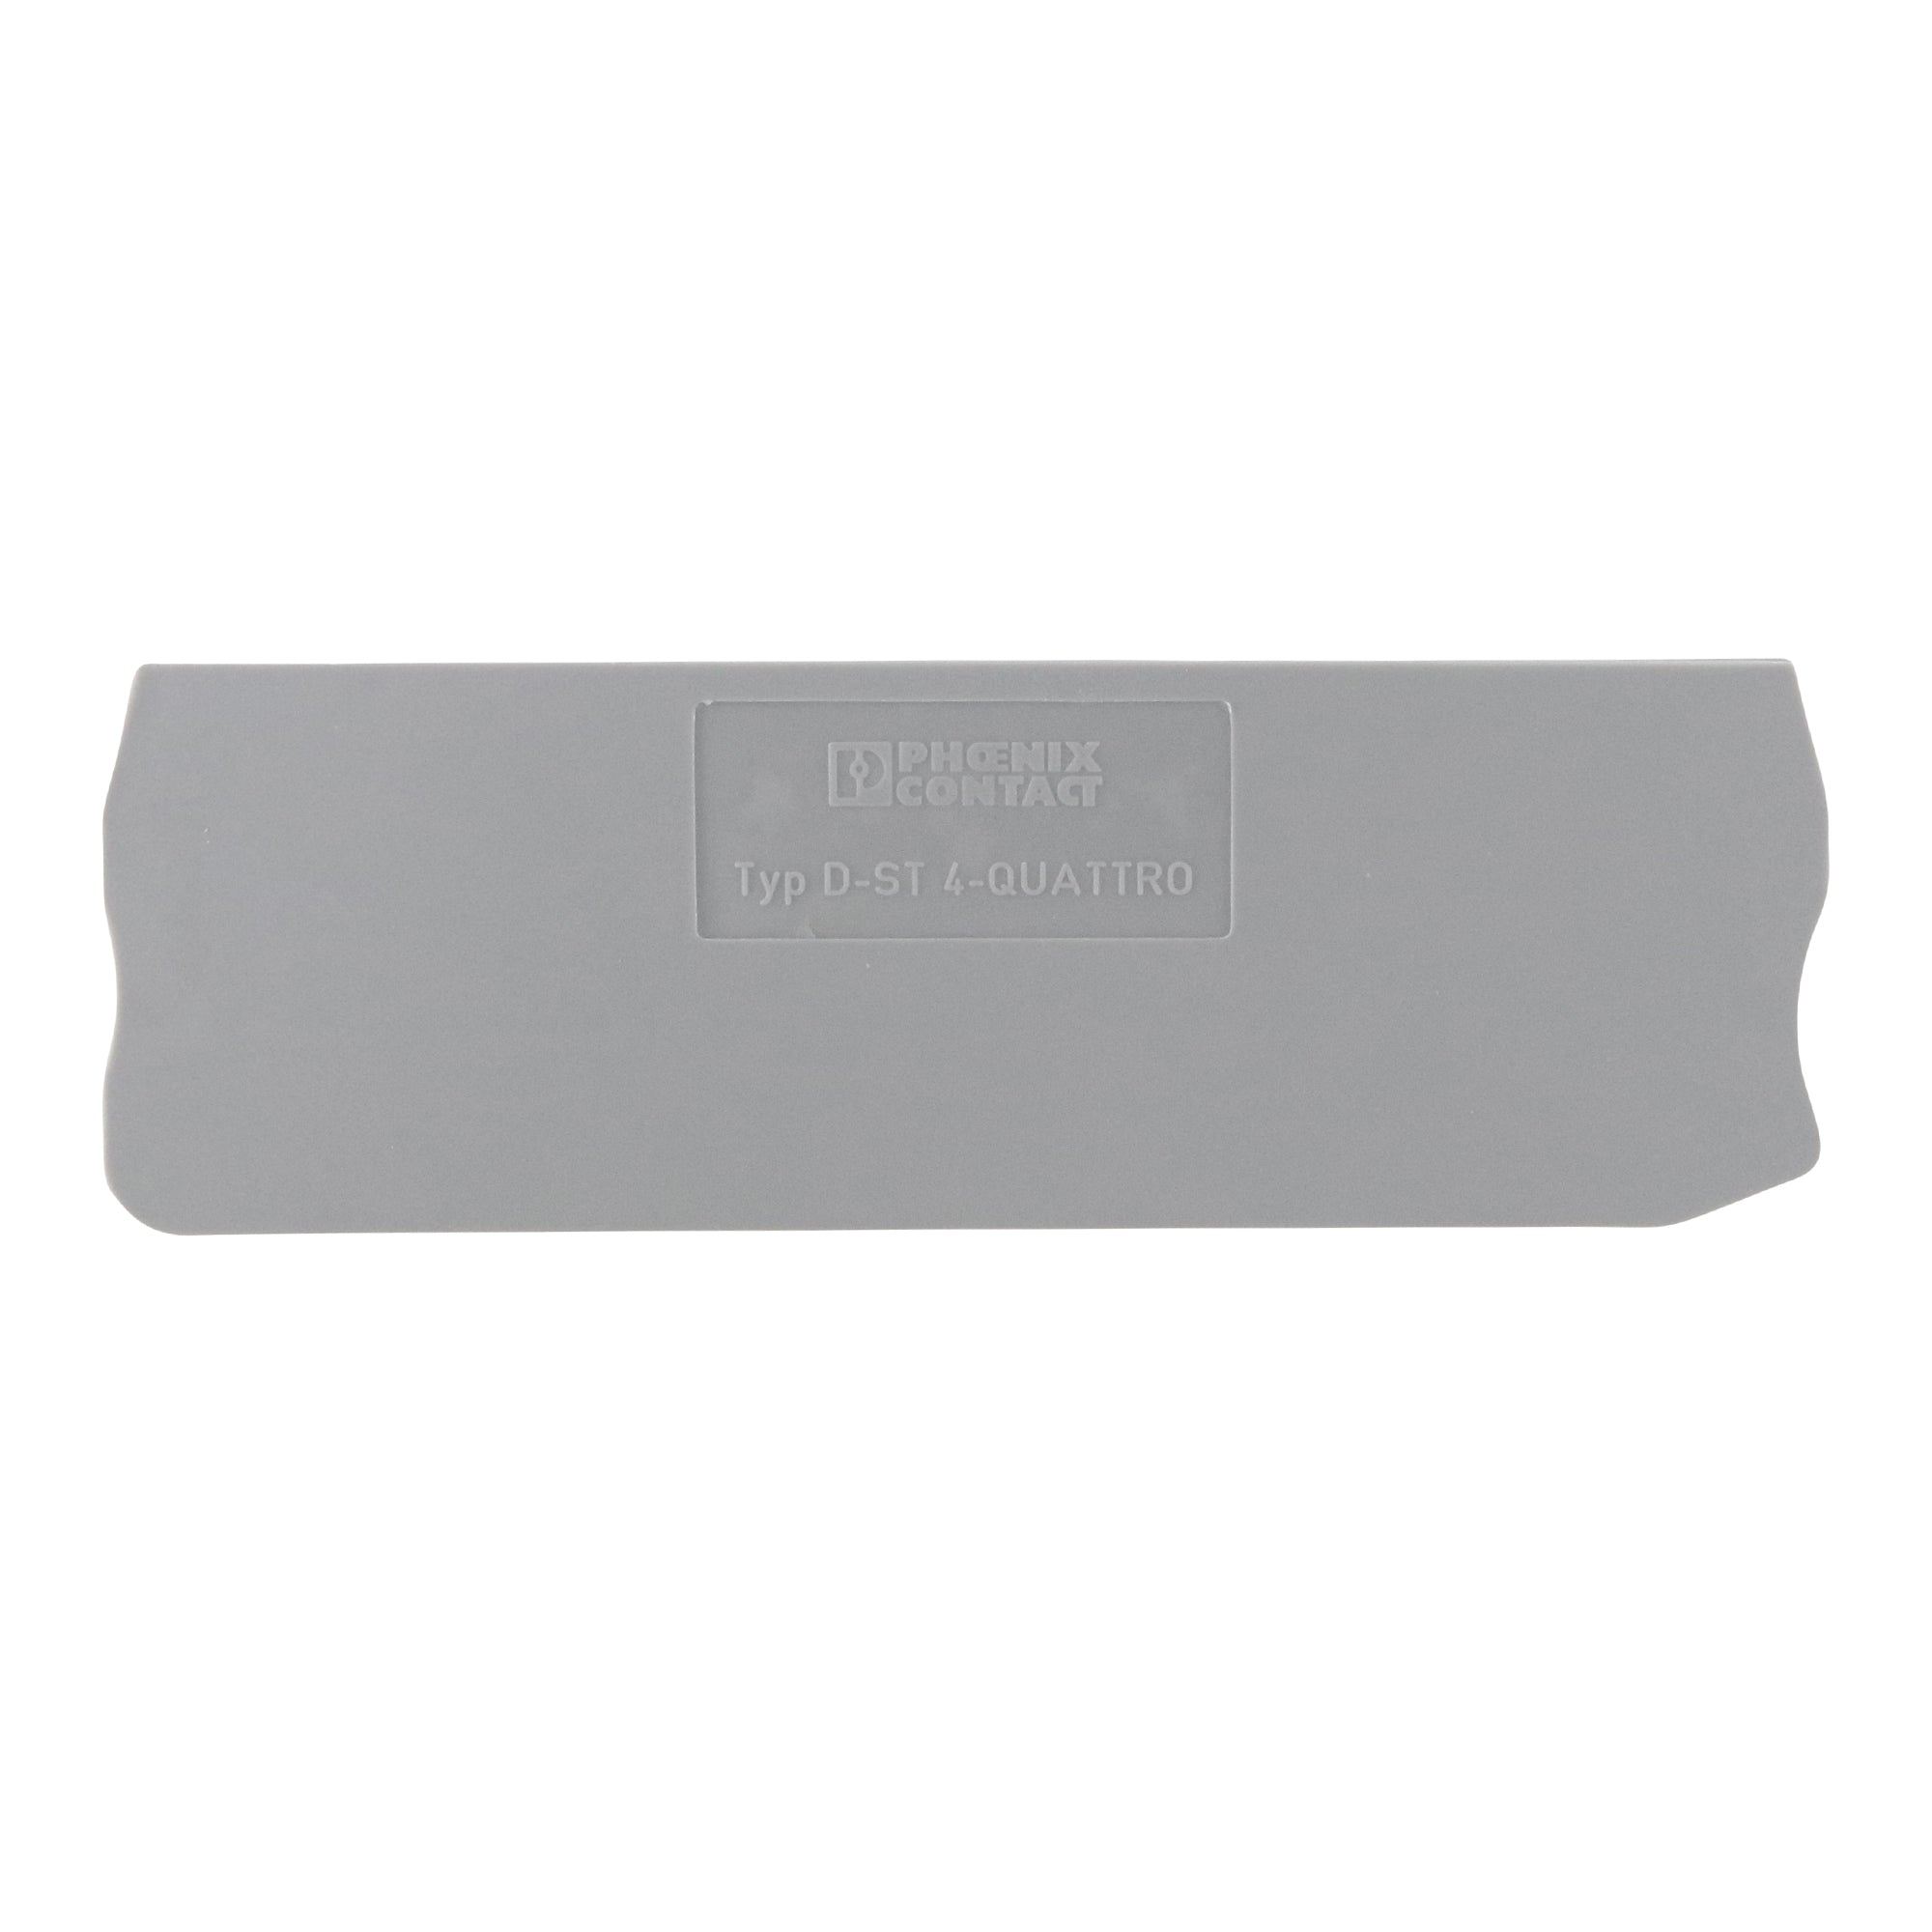 EATON, EATON XBACPT4D22 TERMINAL BLOCK END COVER PLATE, DIN MOUNT, GRAY (10-PACK)